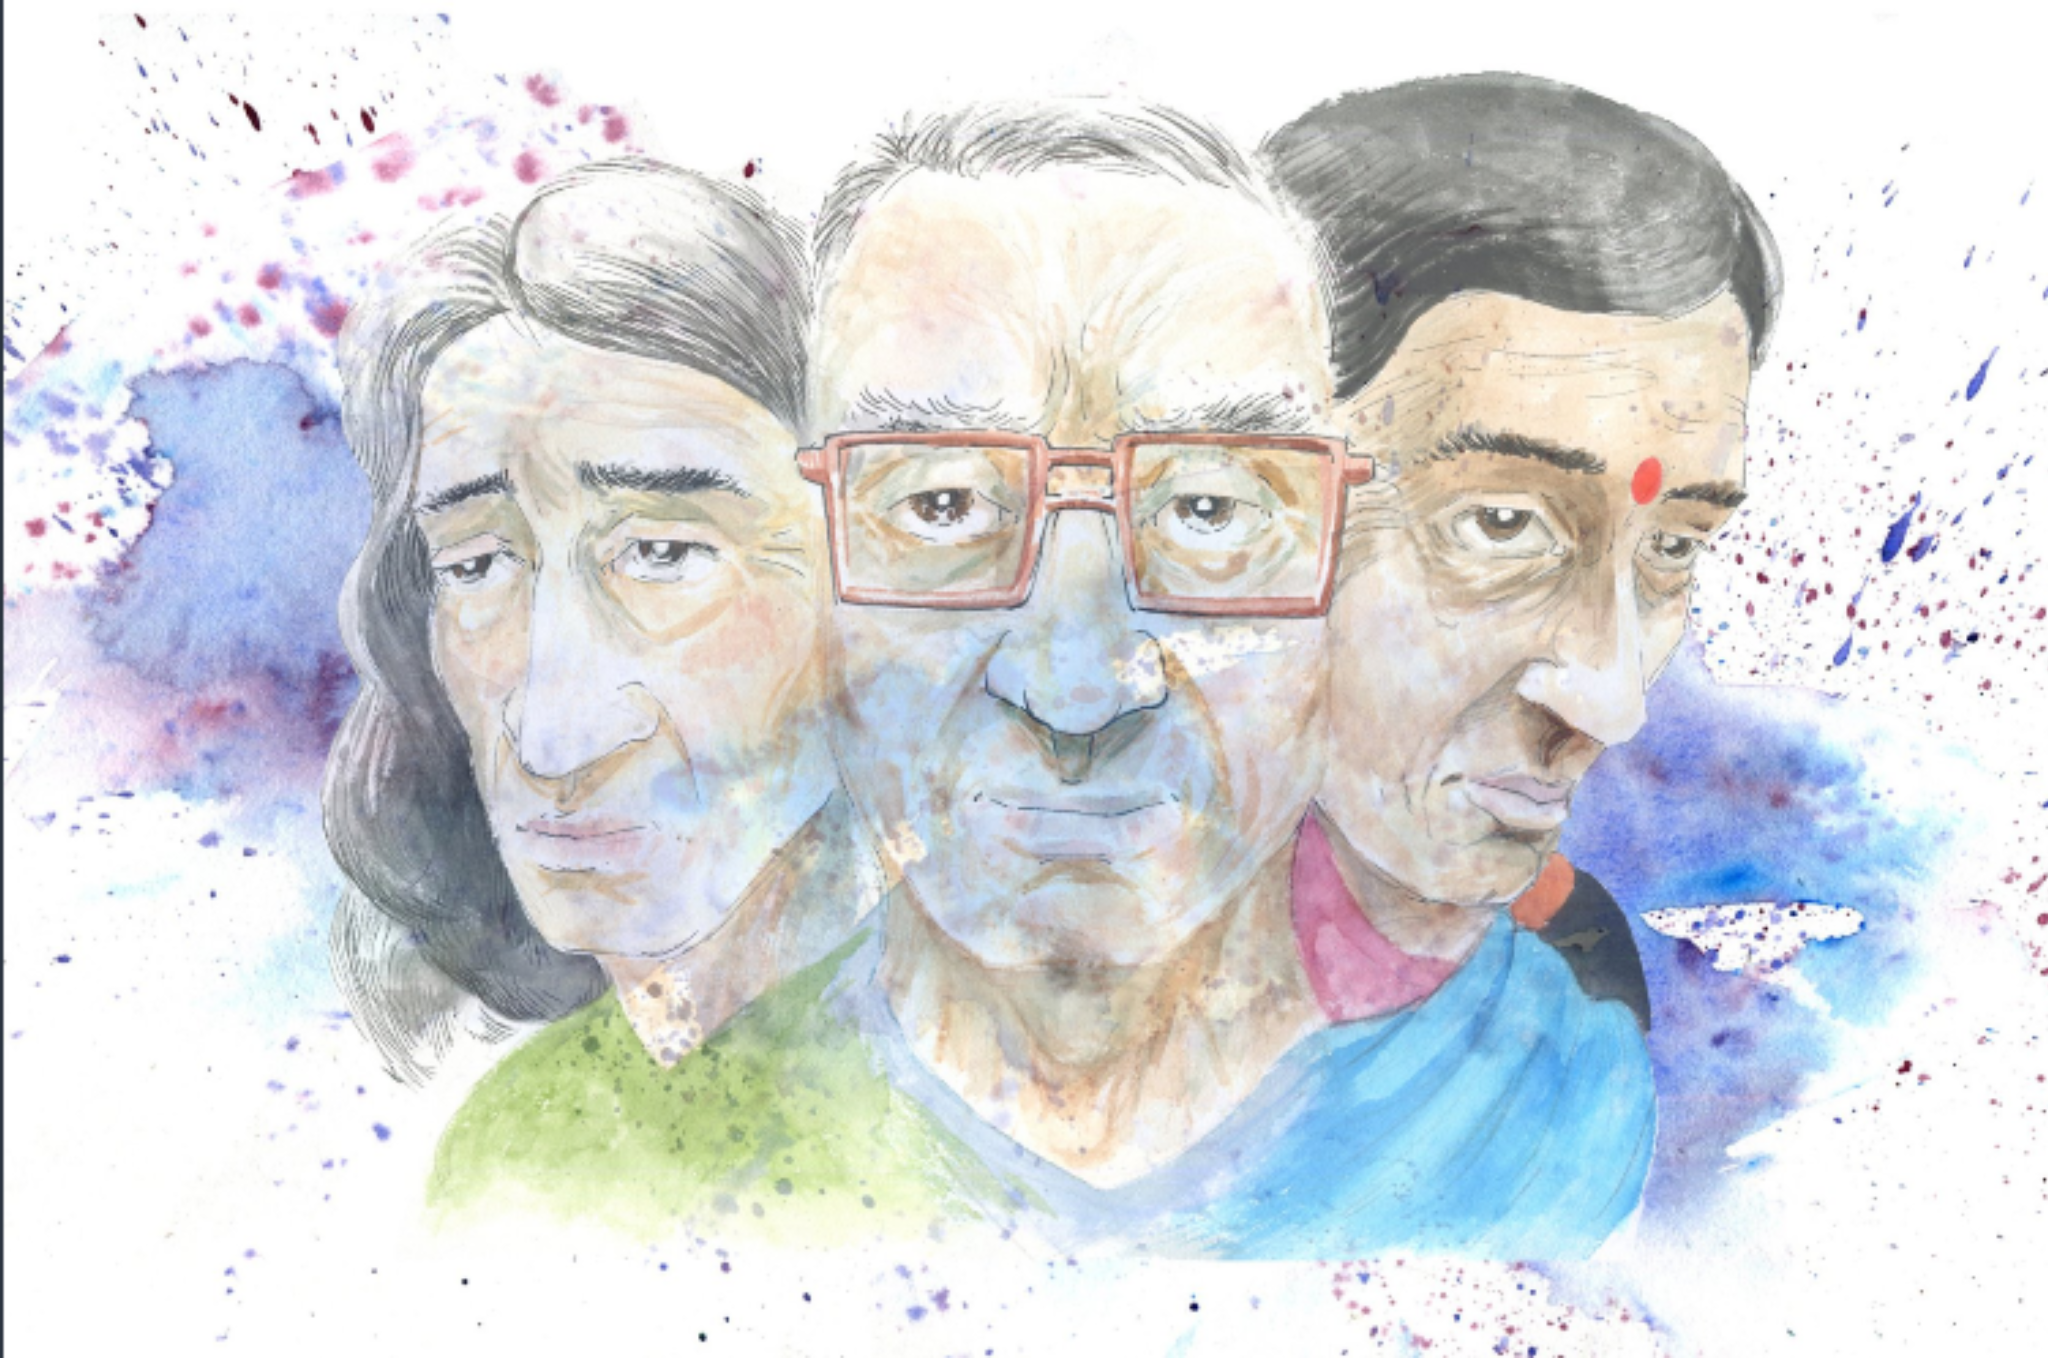 A painting of three older racially diverse people's faces side by side. There are watercolour splatters across the painting.